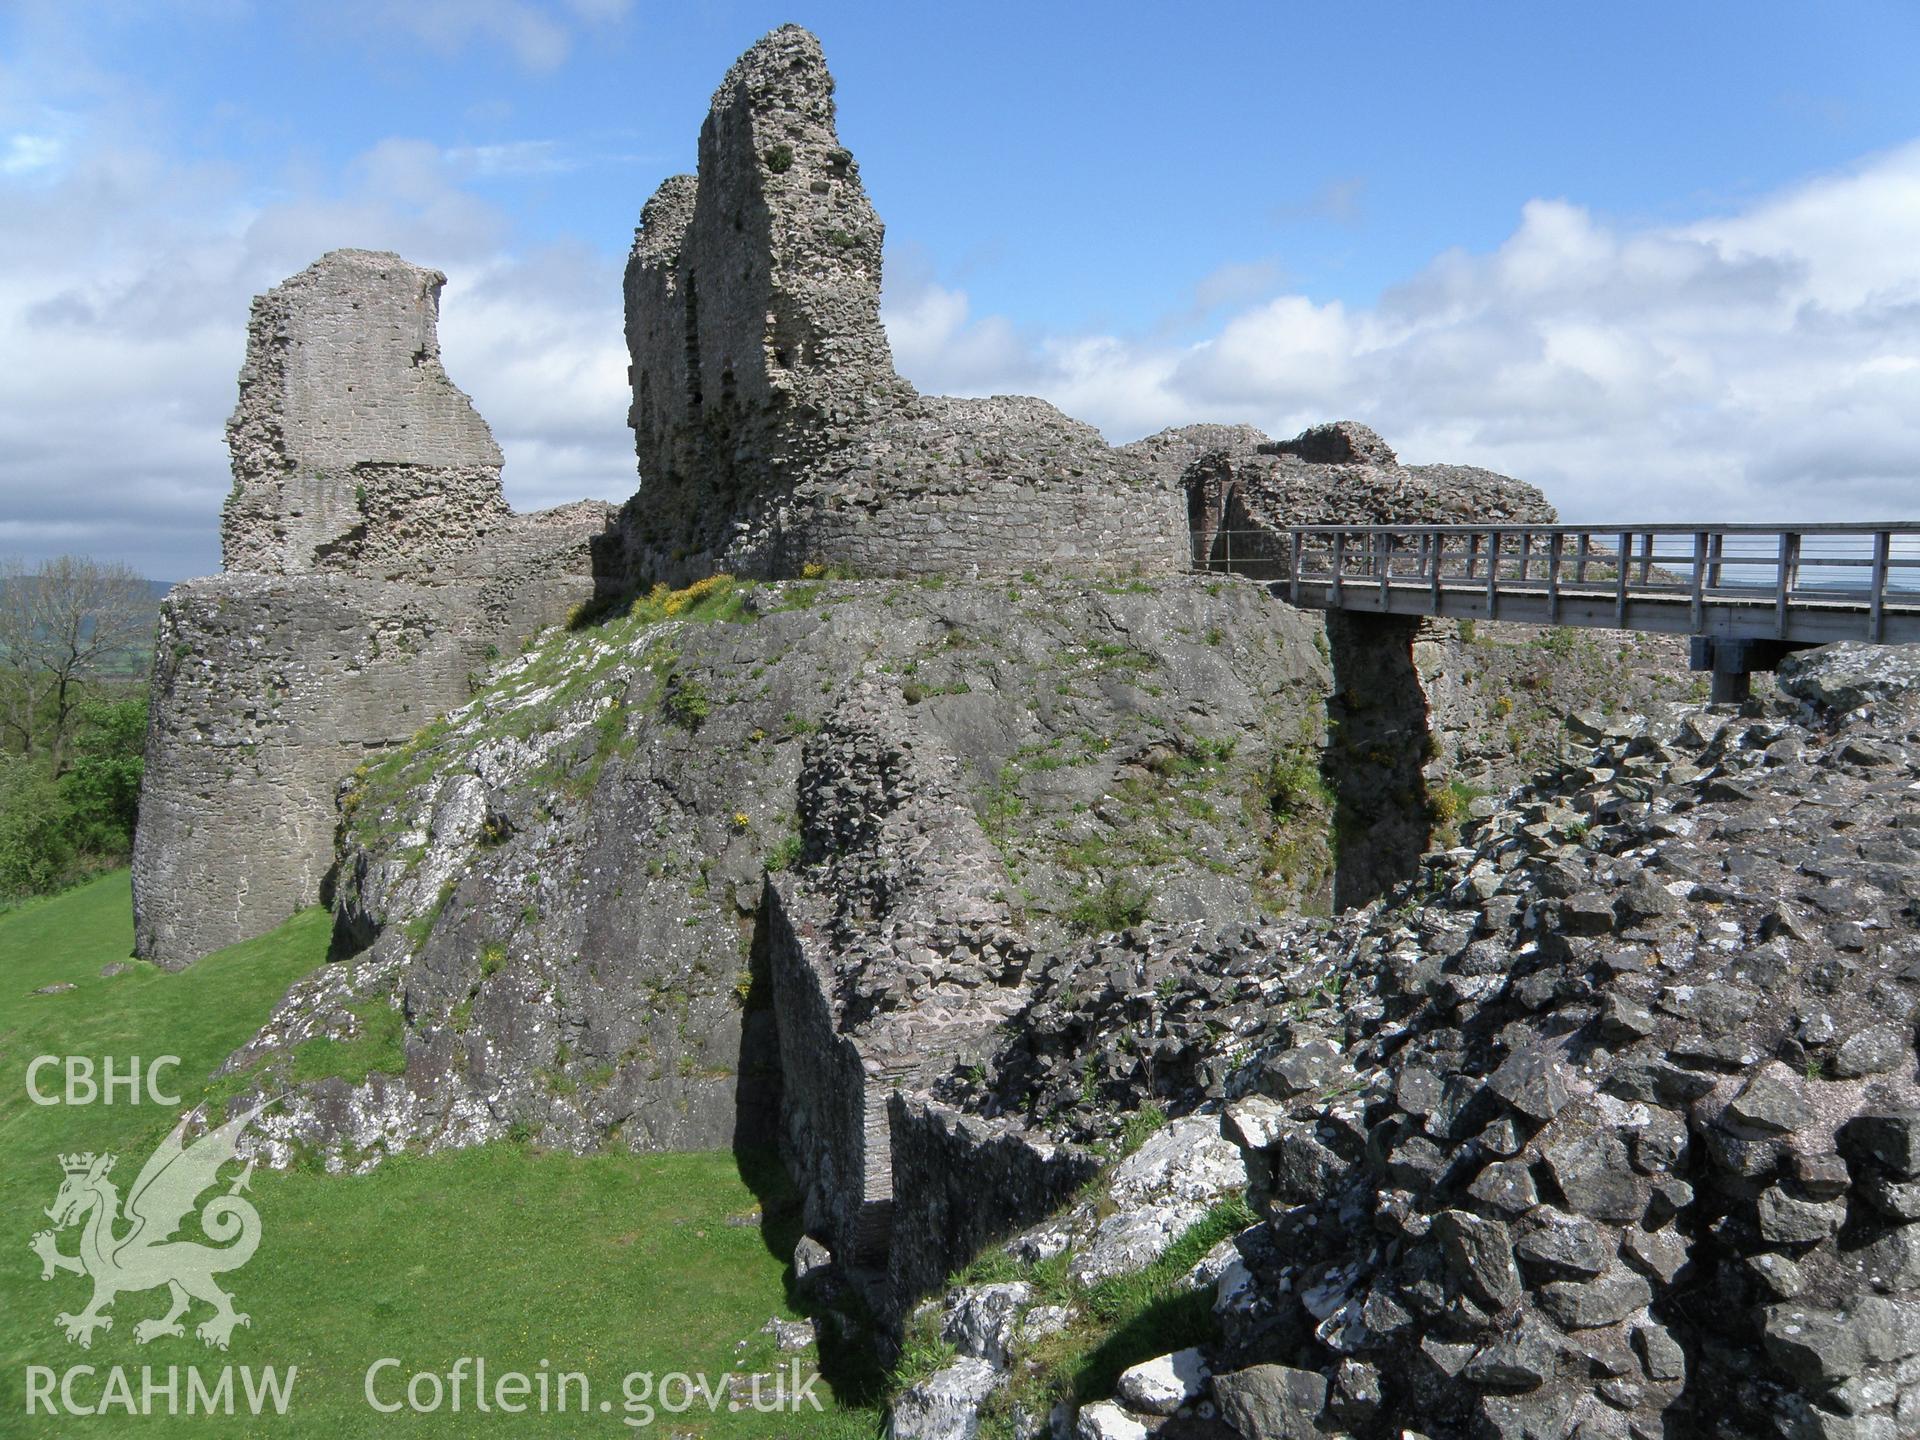 Colour photo showing Montgomery Castle, produced by Paul R. Davis,  10th May 2014.